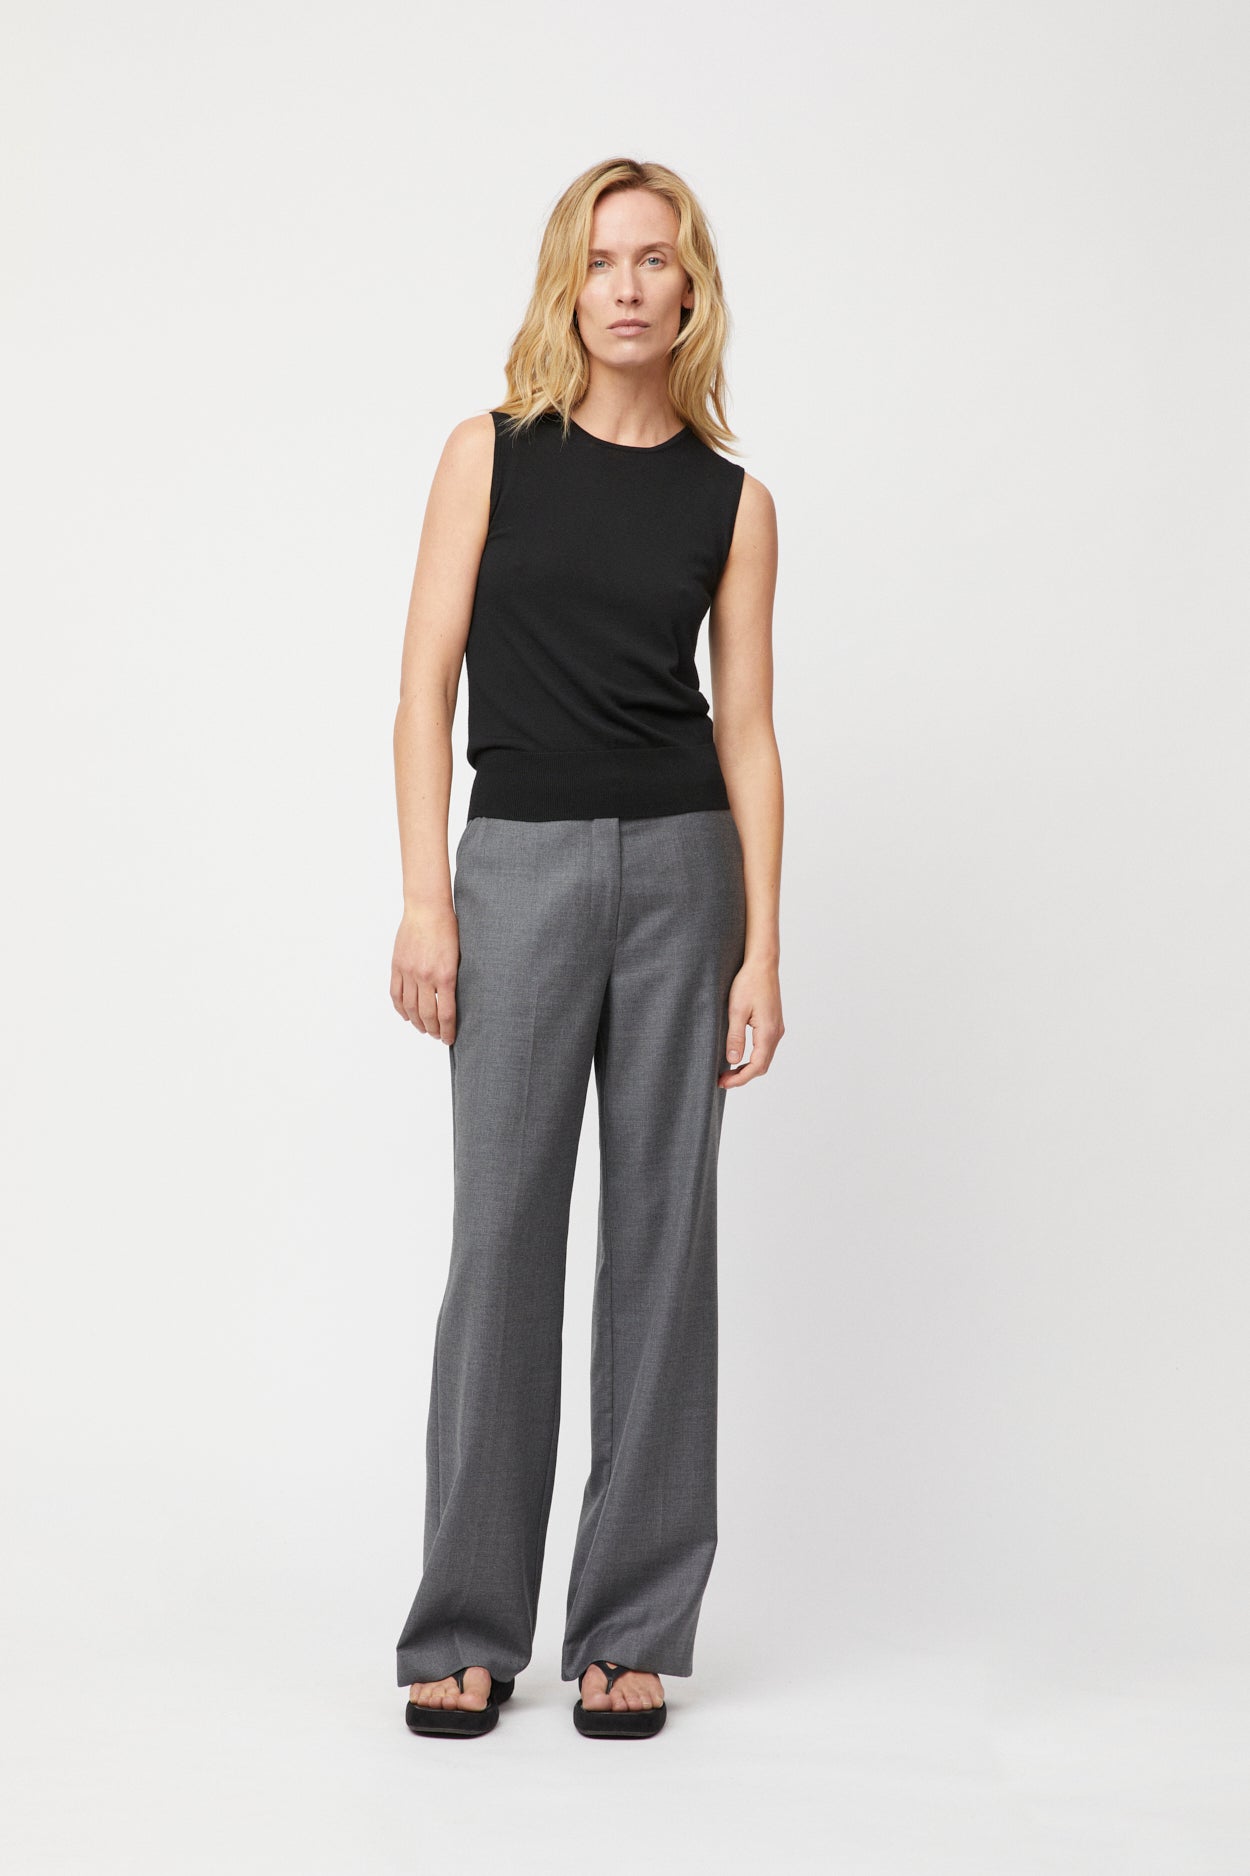 48 Spring Summer Trousers ideas | summer trousers, trousers, trousers women